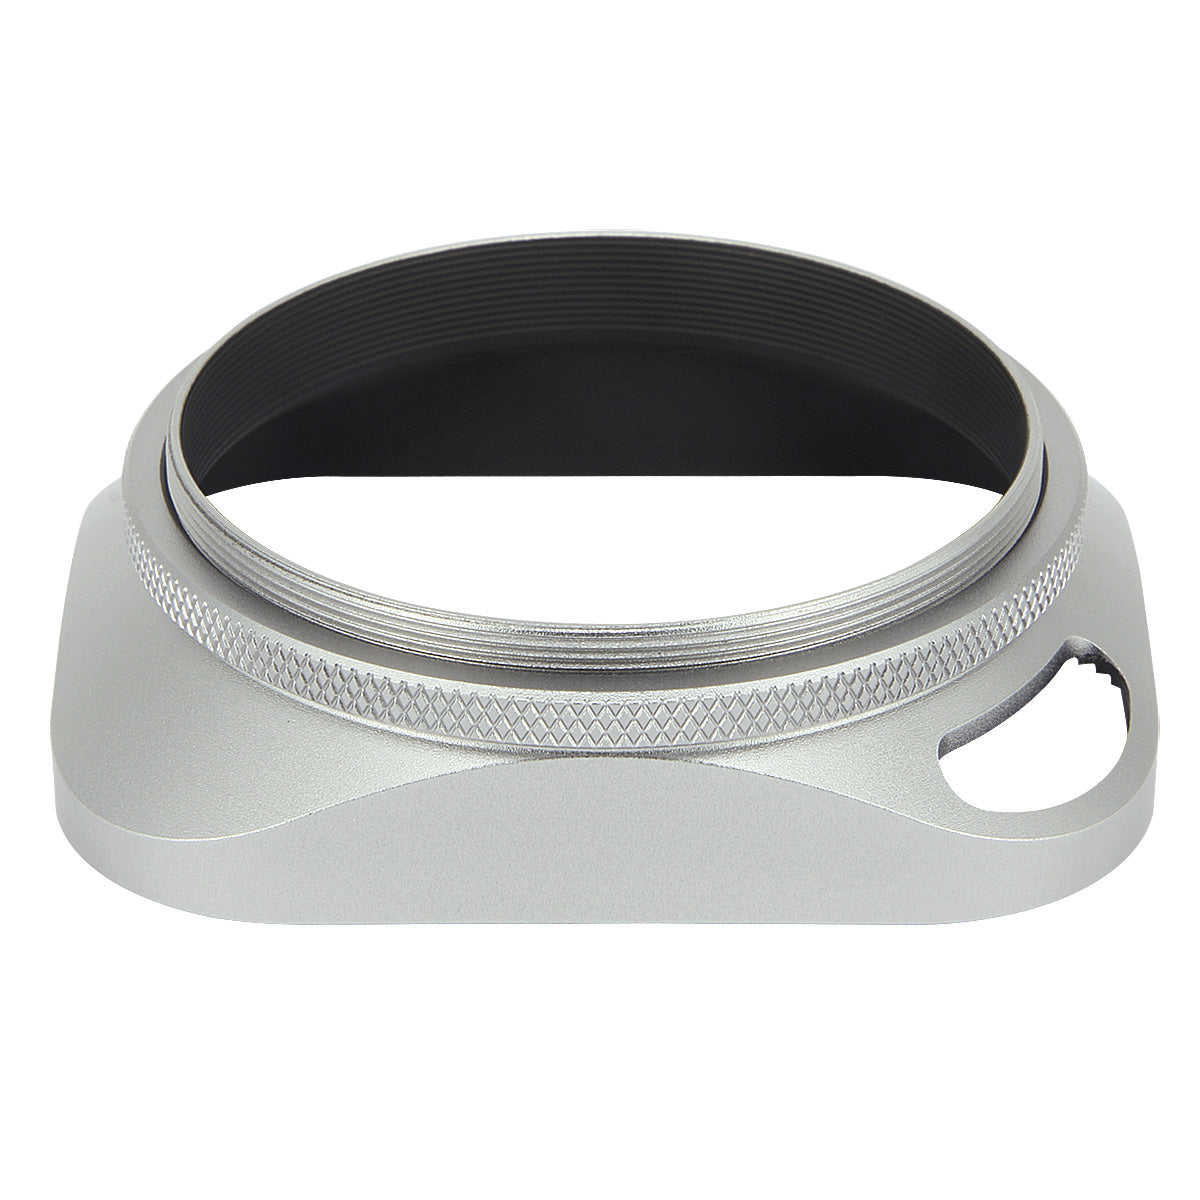 Haoge LH-W58P 58mm Square Metal Screw-in Lens Hood Hollow Out Designed with Cap for Leica Rangefinder Camera with 58mm E58 Filter Thread Lens Silver